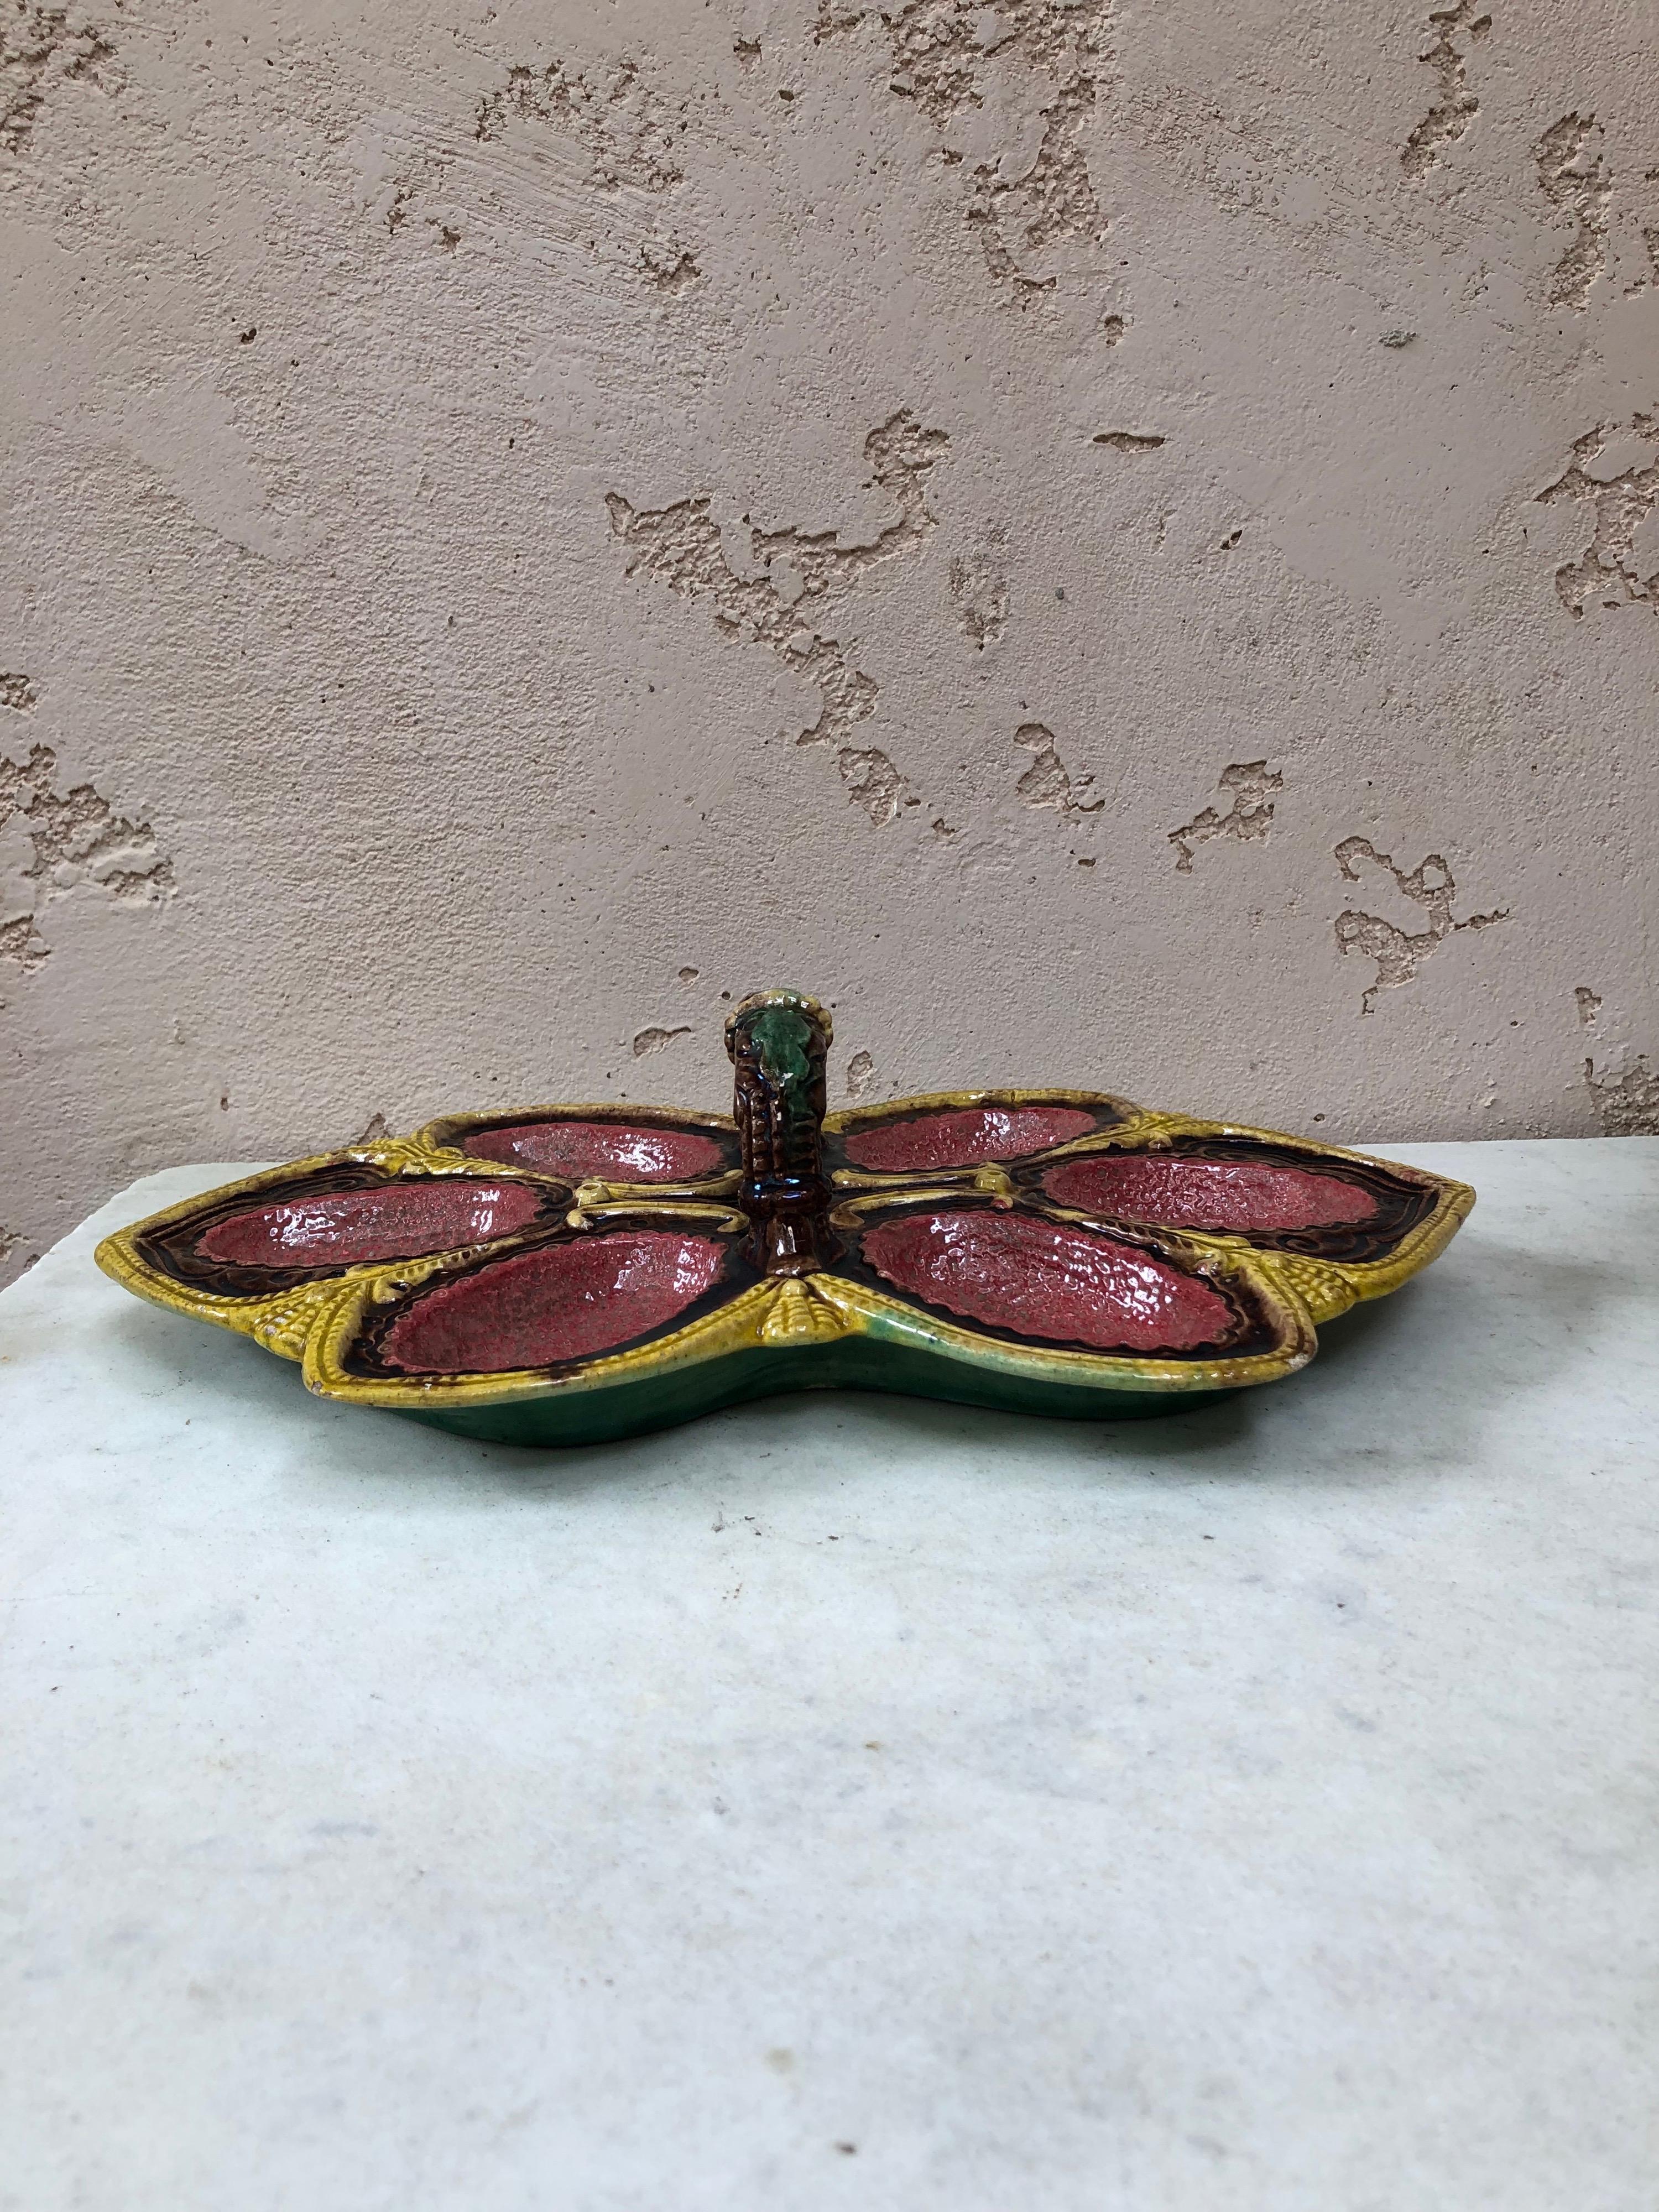 French Rare Majolica Palissy Egg Handled Platter, Circa 1870 For Sale